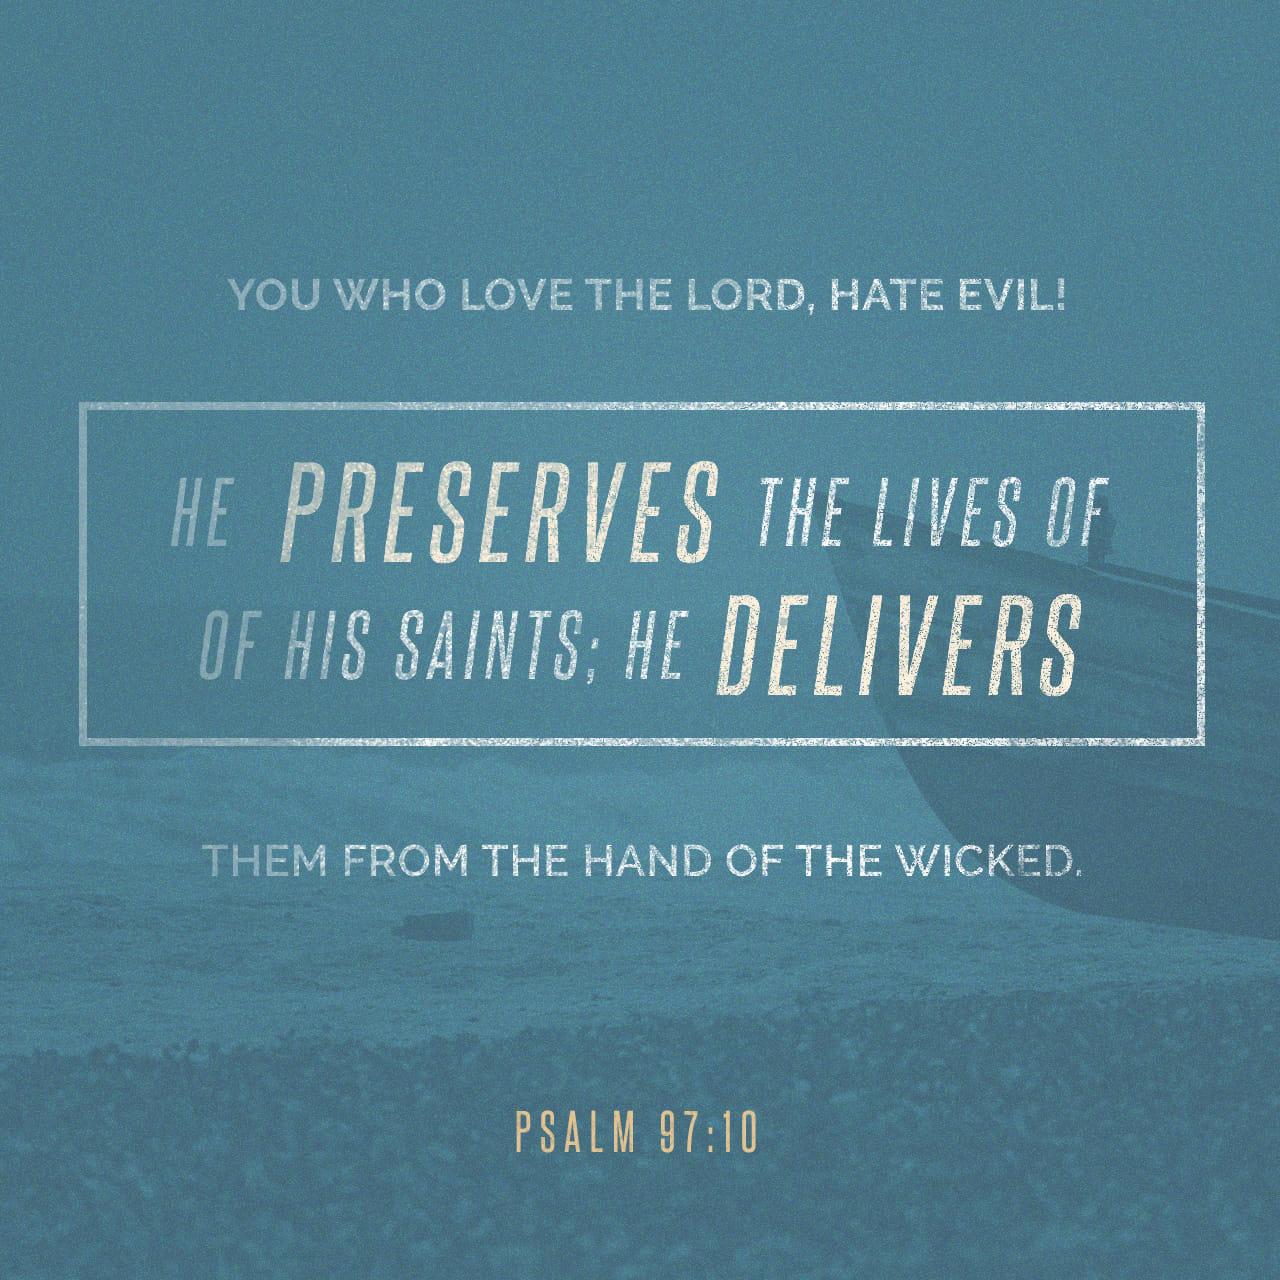 Bible Verse of the Day - day 89 - image 302 (Psalms 97:1-12)